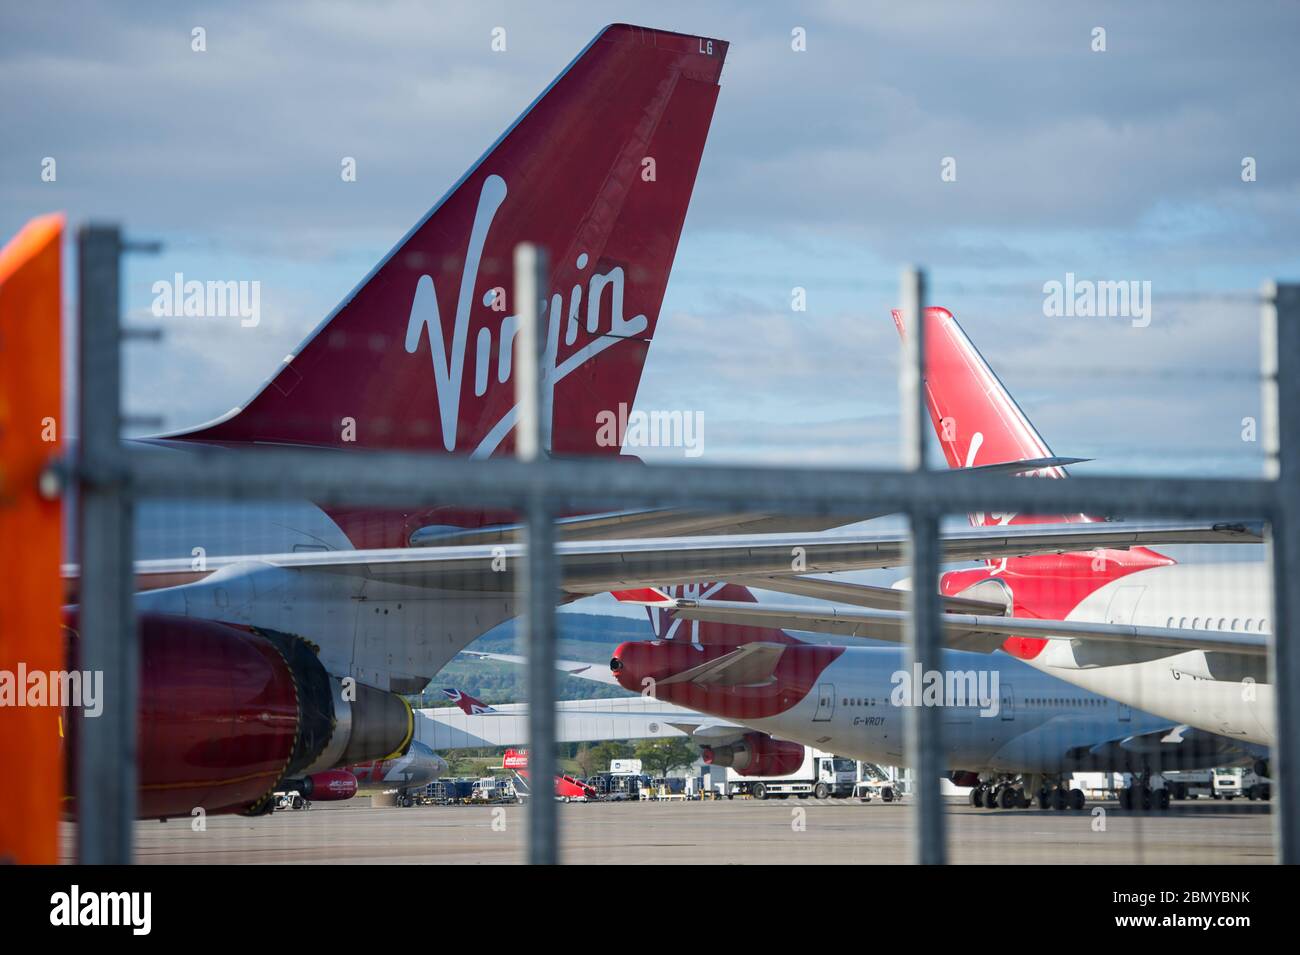 Glasgow, UK. 11th May, 2020. Pictured: Virgin Atlantic move more of their aircraft to Glasgow Airport for storage during the Coronavirus (COVID19) extended lockdown. Seen on the Tarmac are two Boeing 747-400 and two Airbus A330-300 Aircraft. So far Virgin Atlantic announced they will close down their operations at Gatwick Airport indefinitely, which will have massive knock on effect for other airlines and the south of England. Credit: Colin Fisher/Alamy Live News Stock Photo